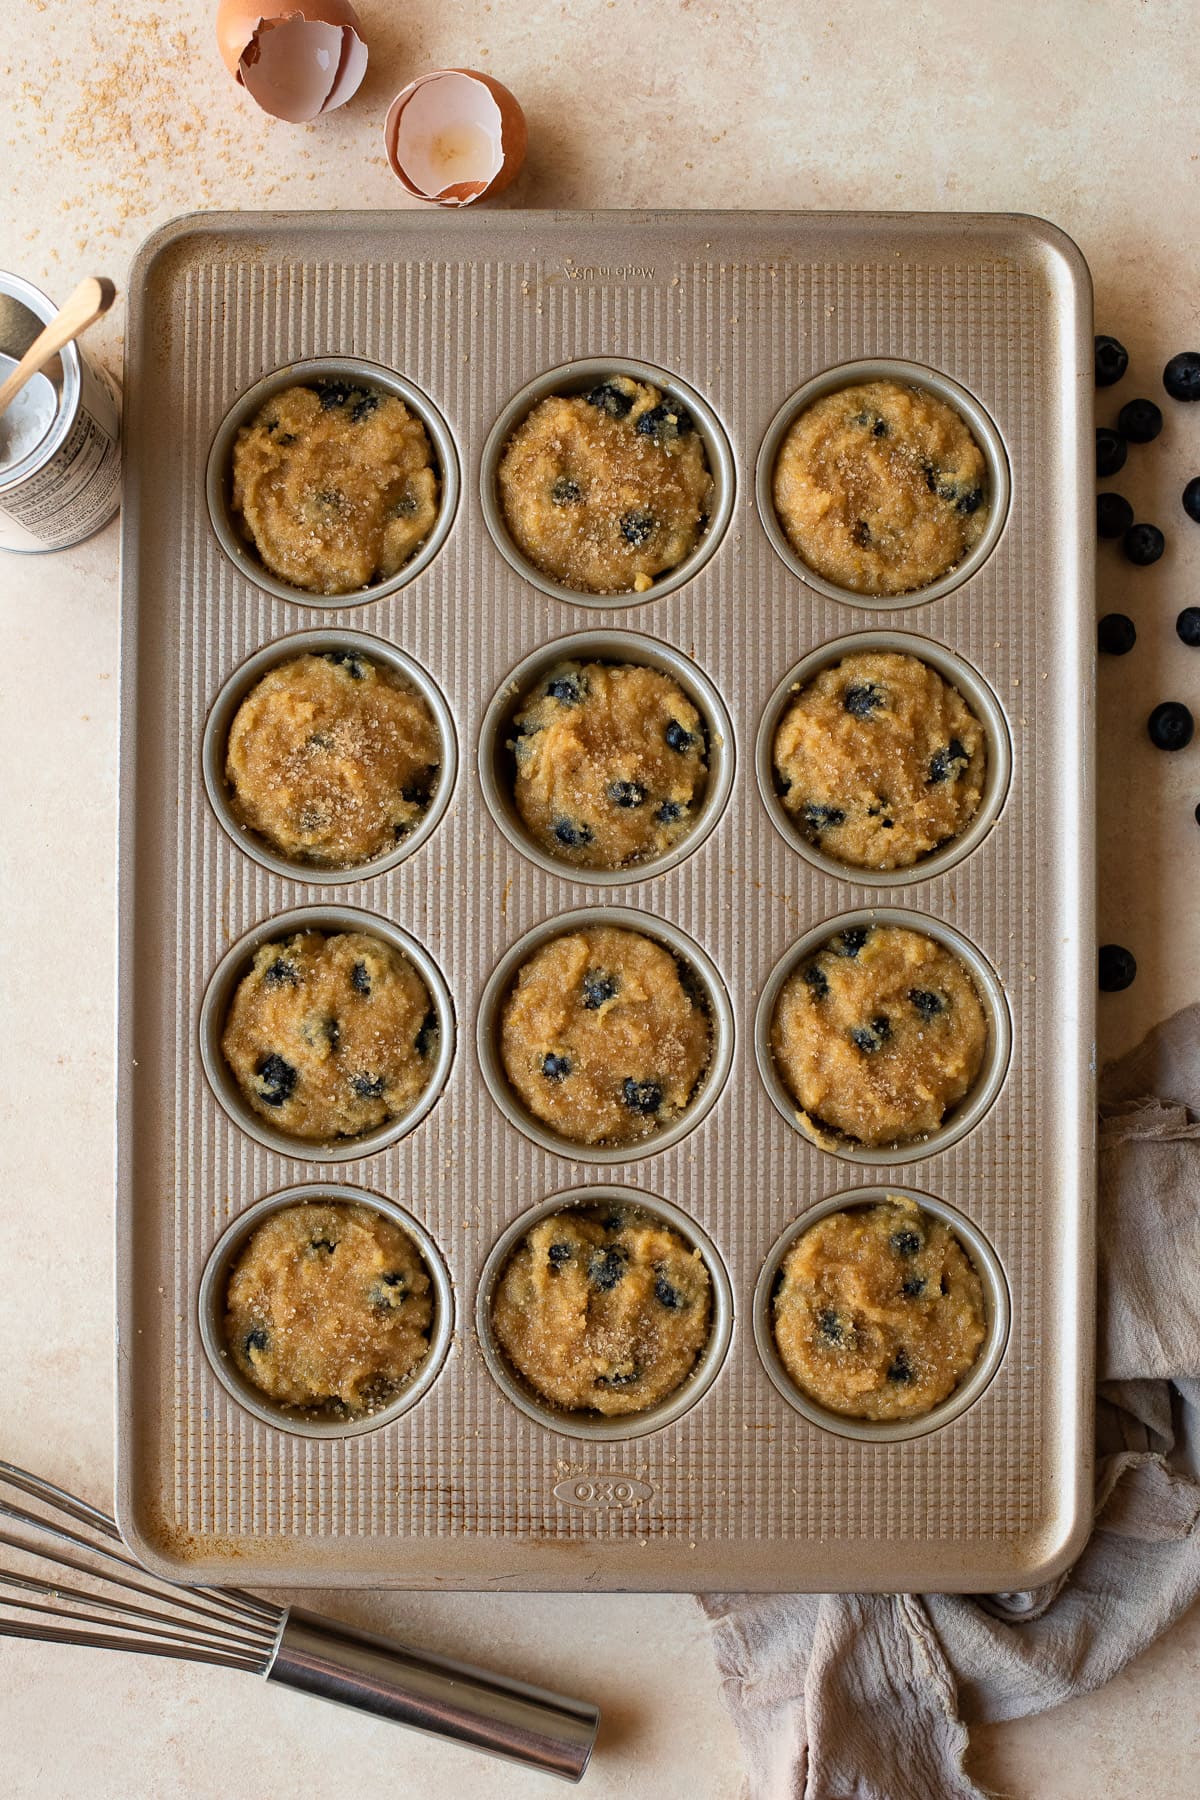 Blueberry almond flour muffin batter in a muffin pan.